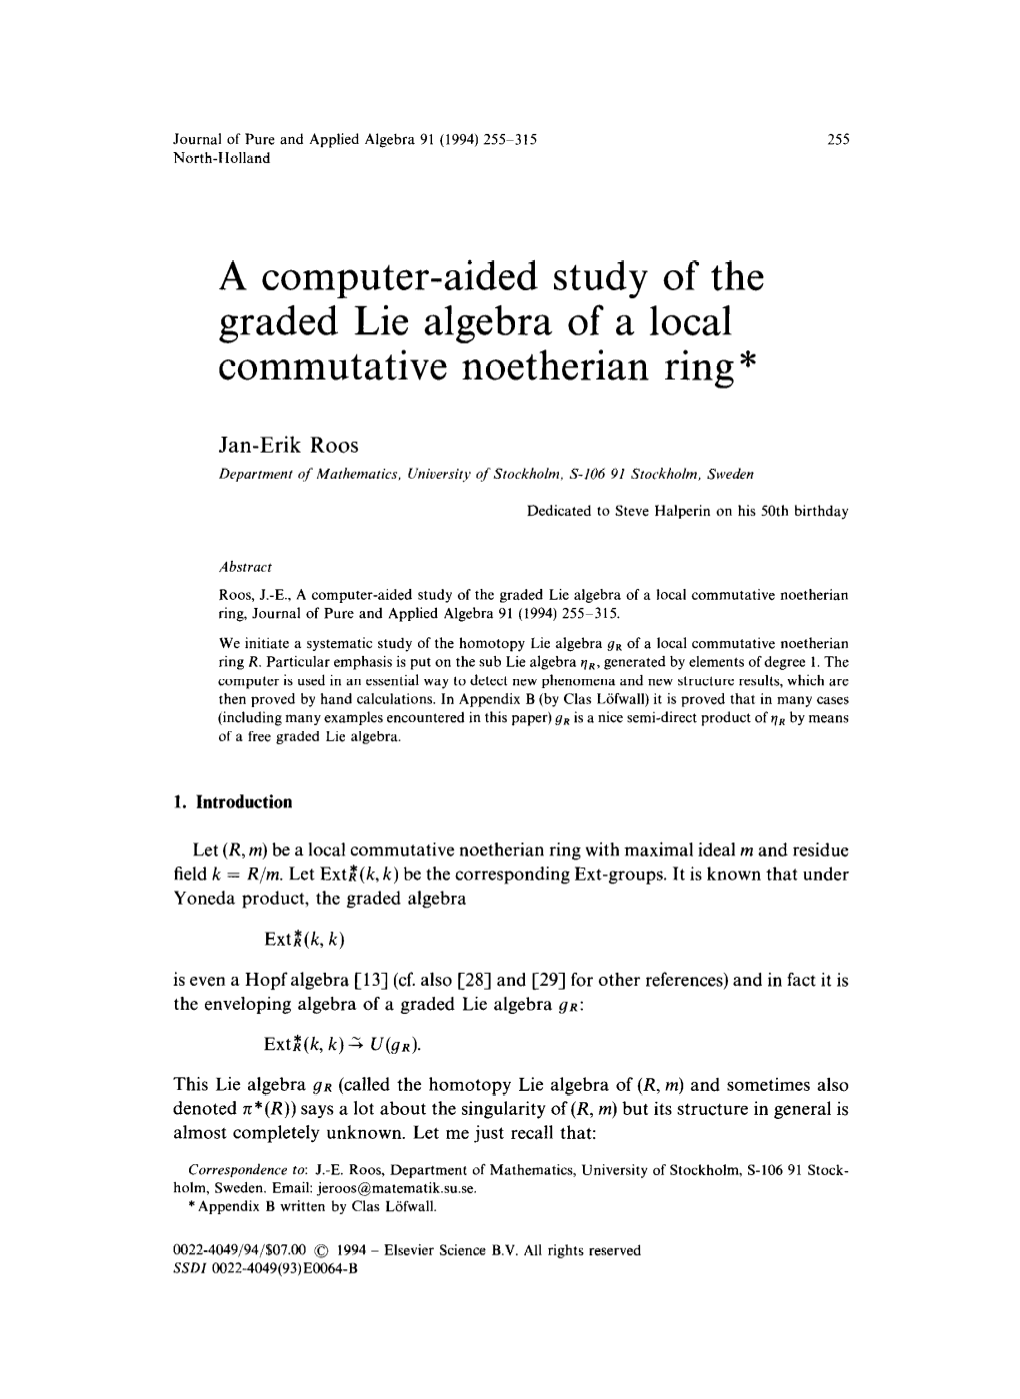 A Computer-Aided Study of the Graded Lie Algebra of a Local Commutative Noetherian Ring *